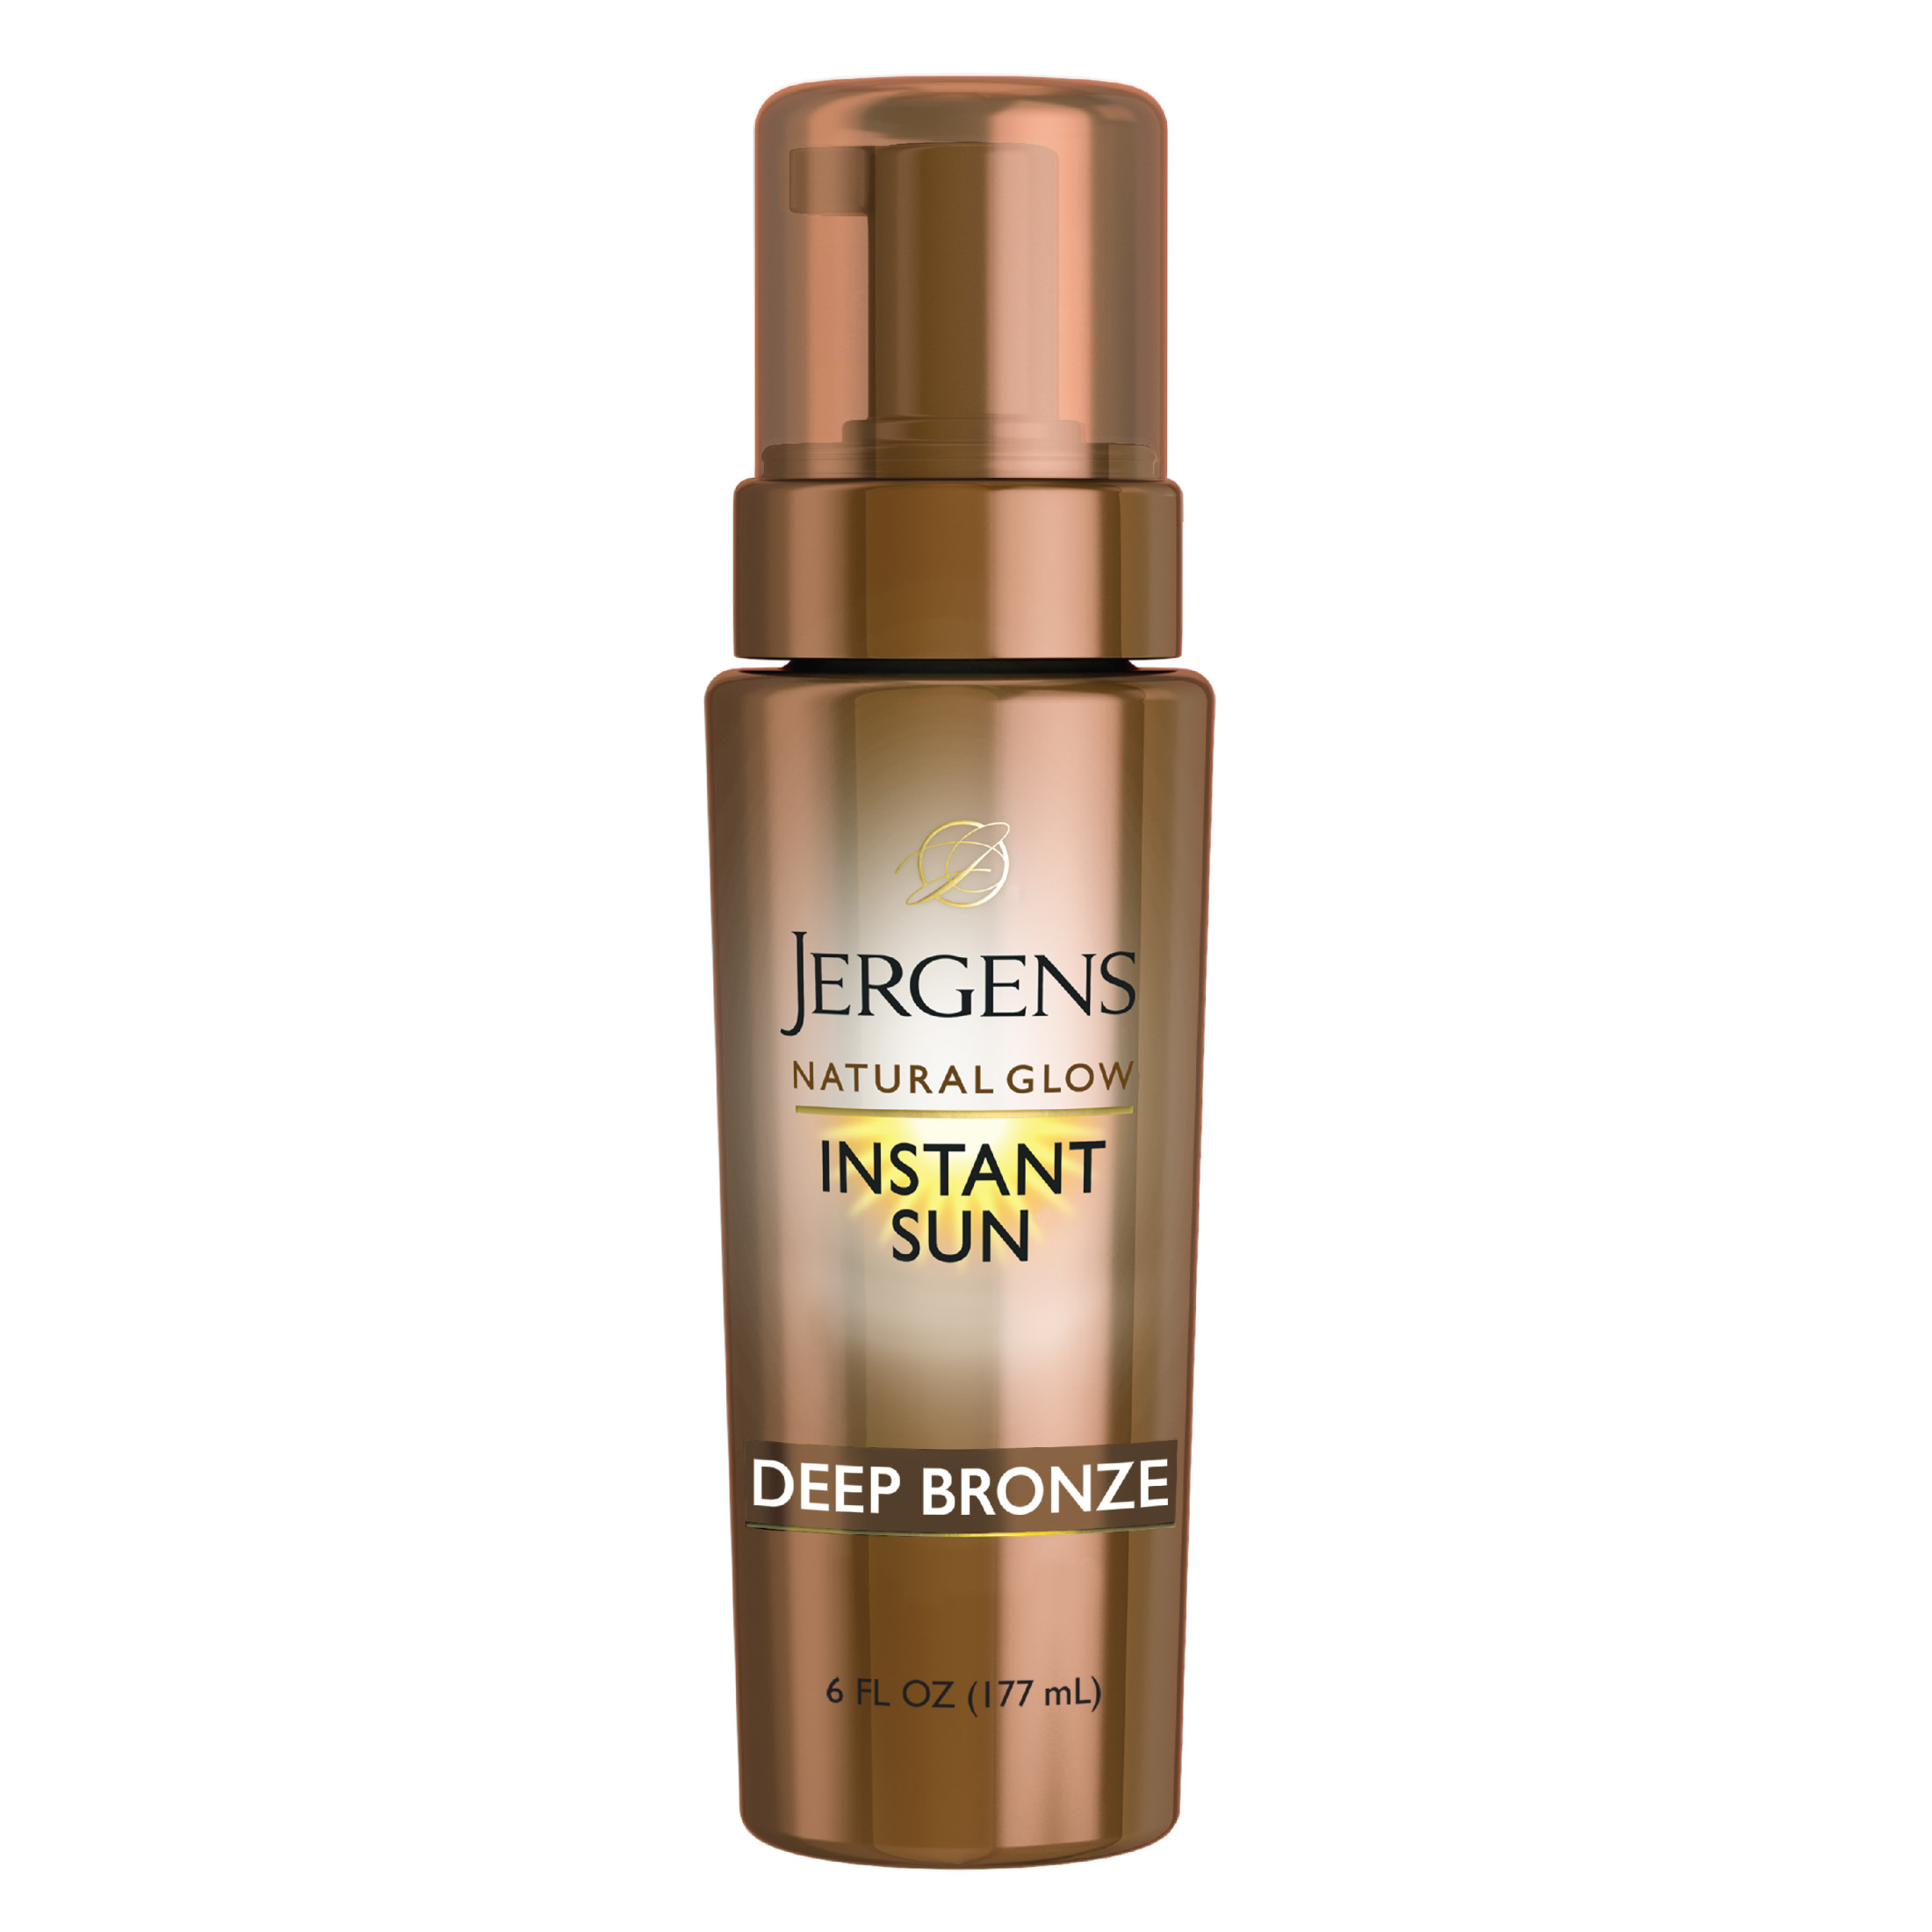 Jergens Natural Glow Instant Sun Sunless Tanning Mousse, Deep Bronze, 6 fl oz - image 1 of 10